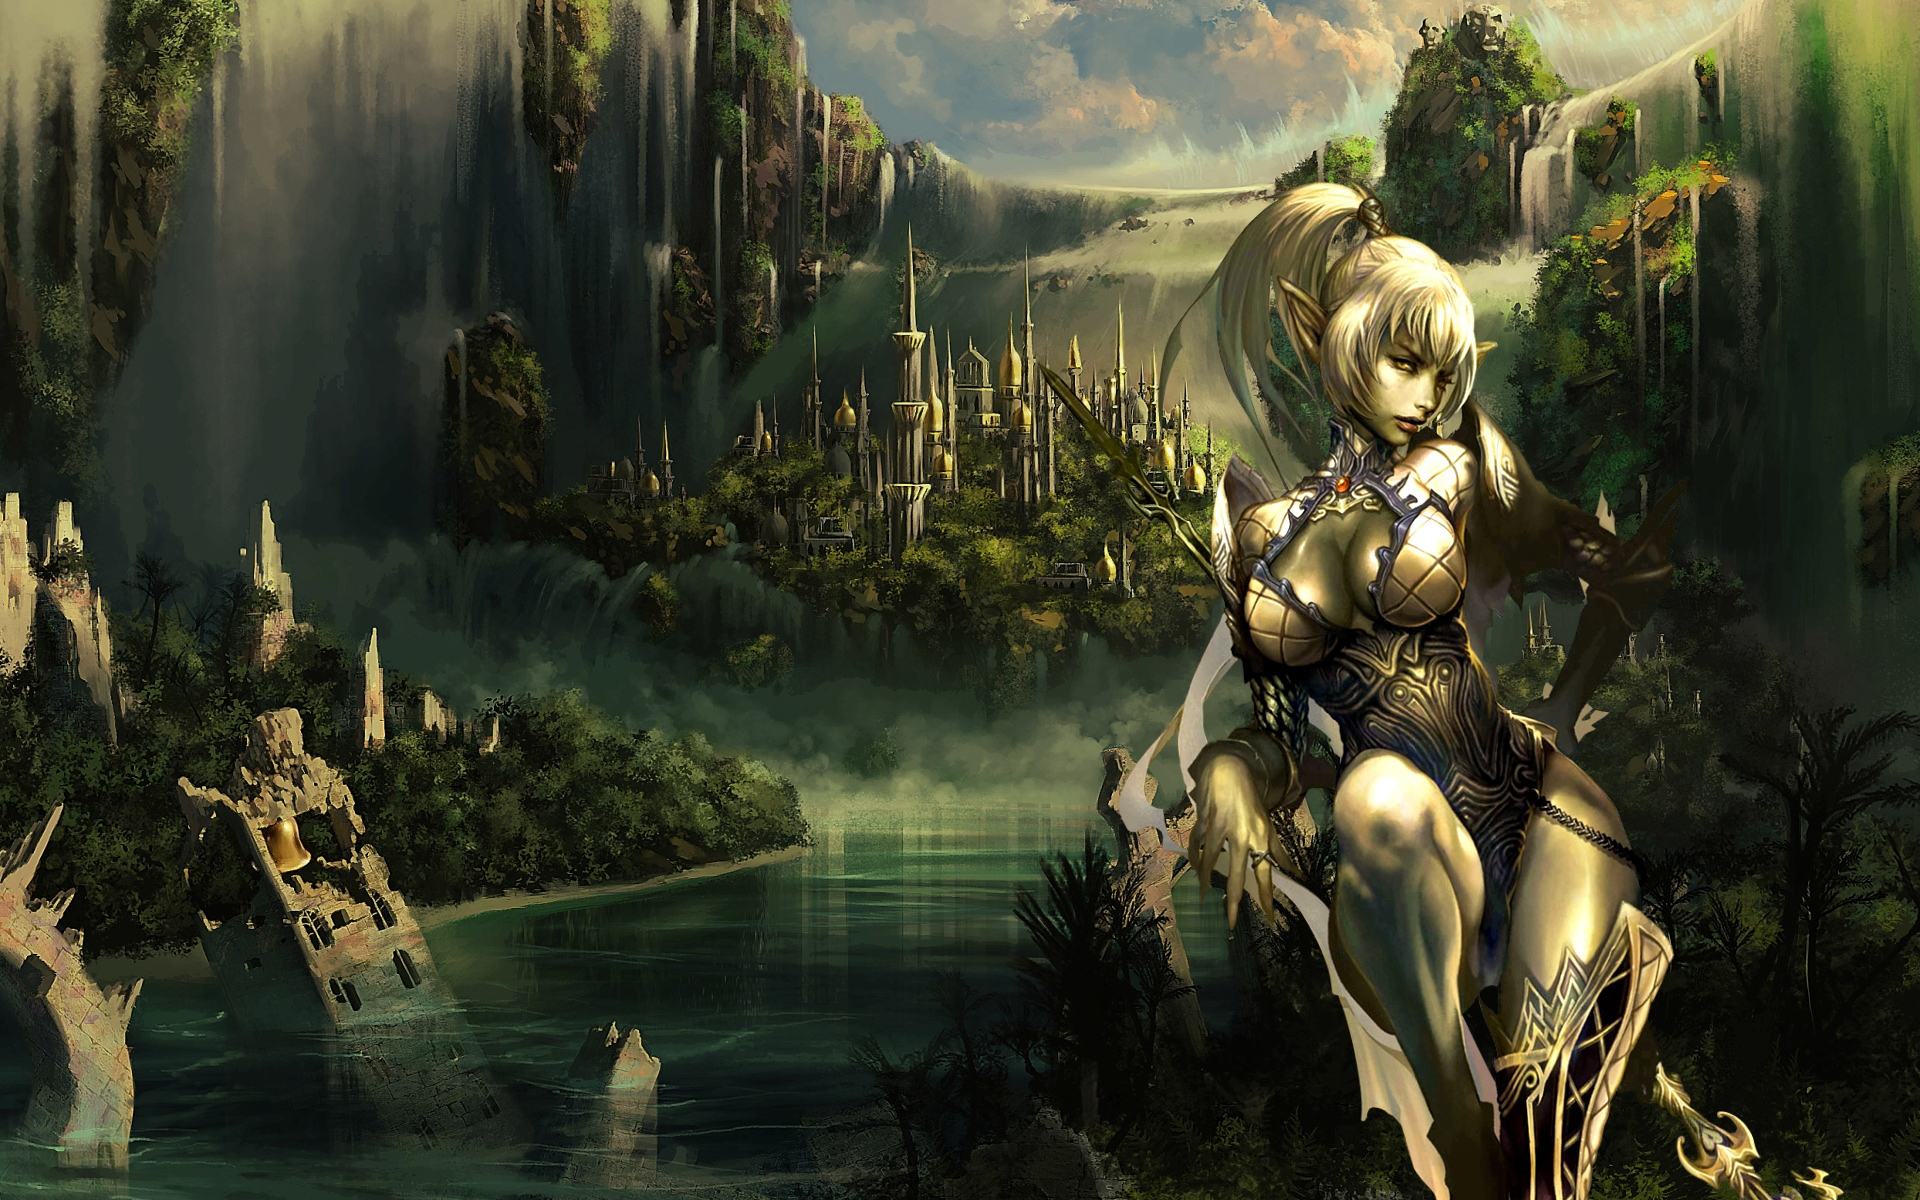 Lineage video game character, portraying an elf in a captivating desktop wallpaper.